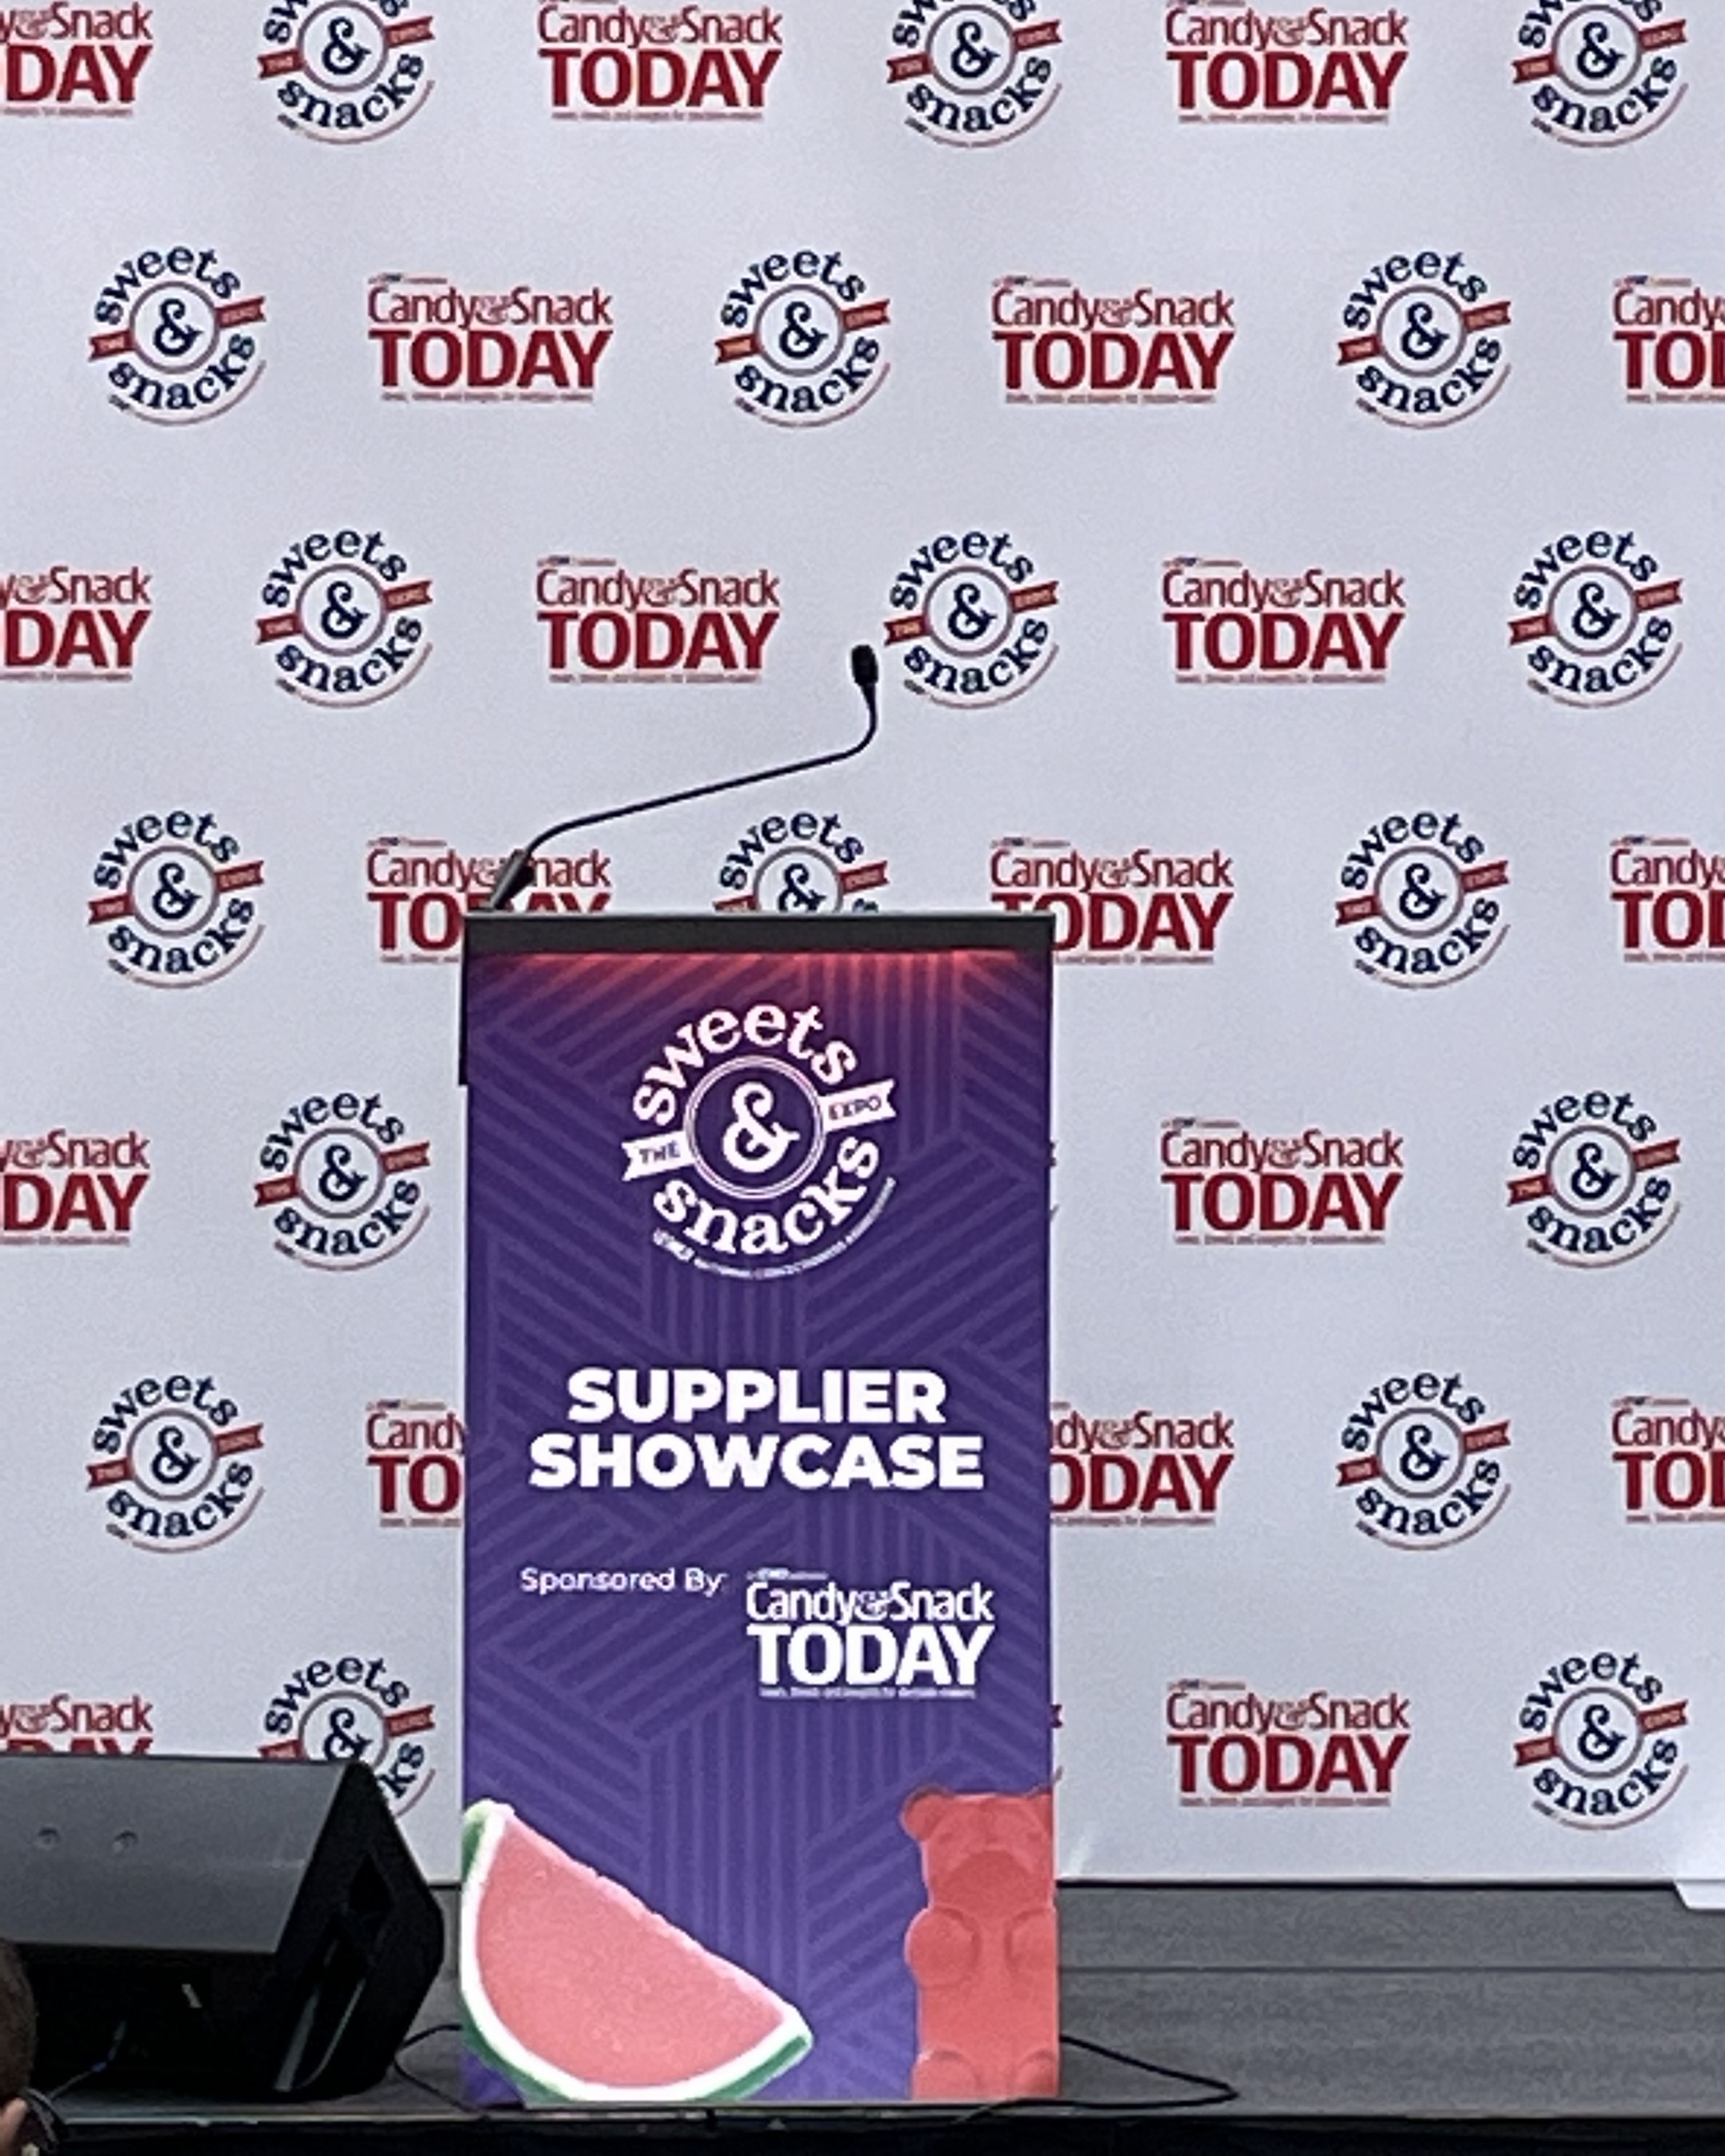 Novacart at the supplier showcase of Sweets & Snacks 2024!